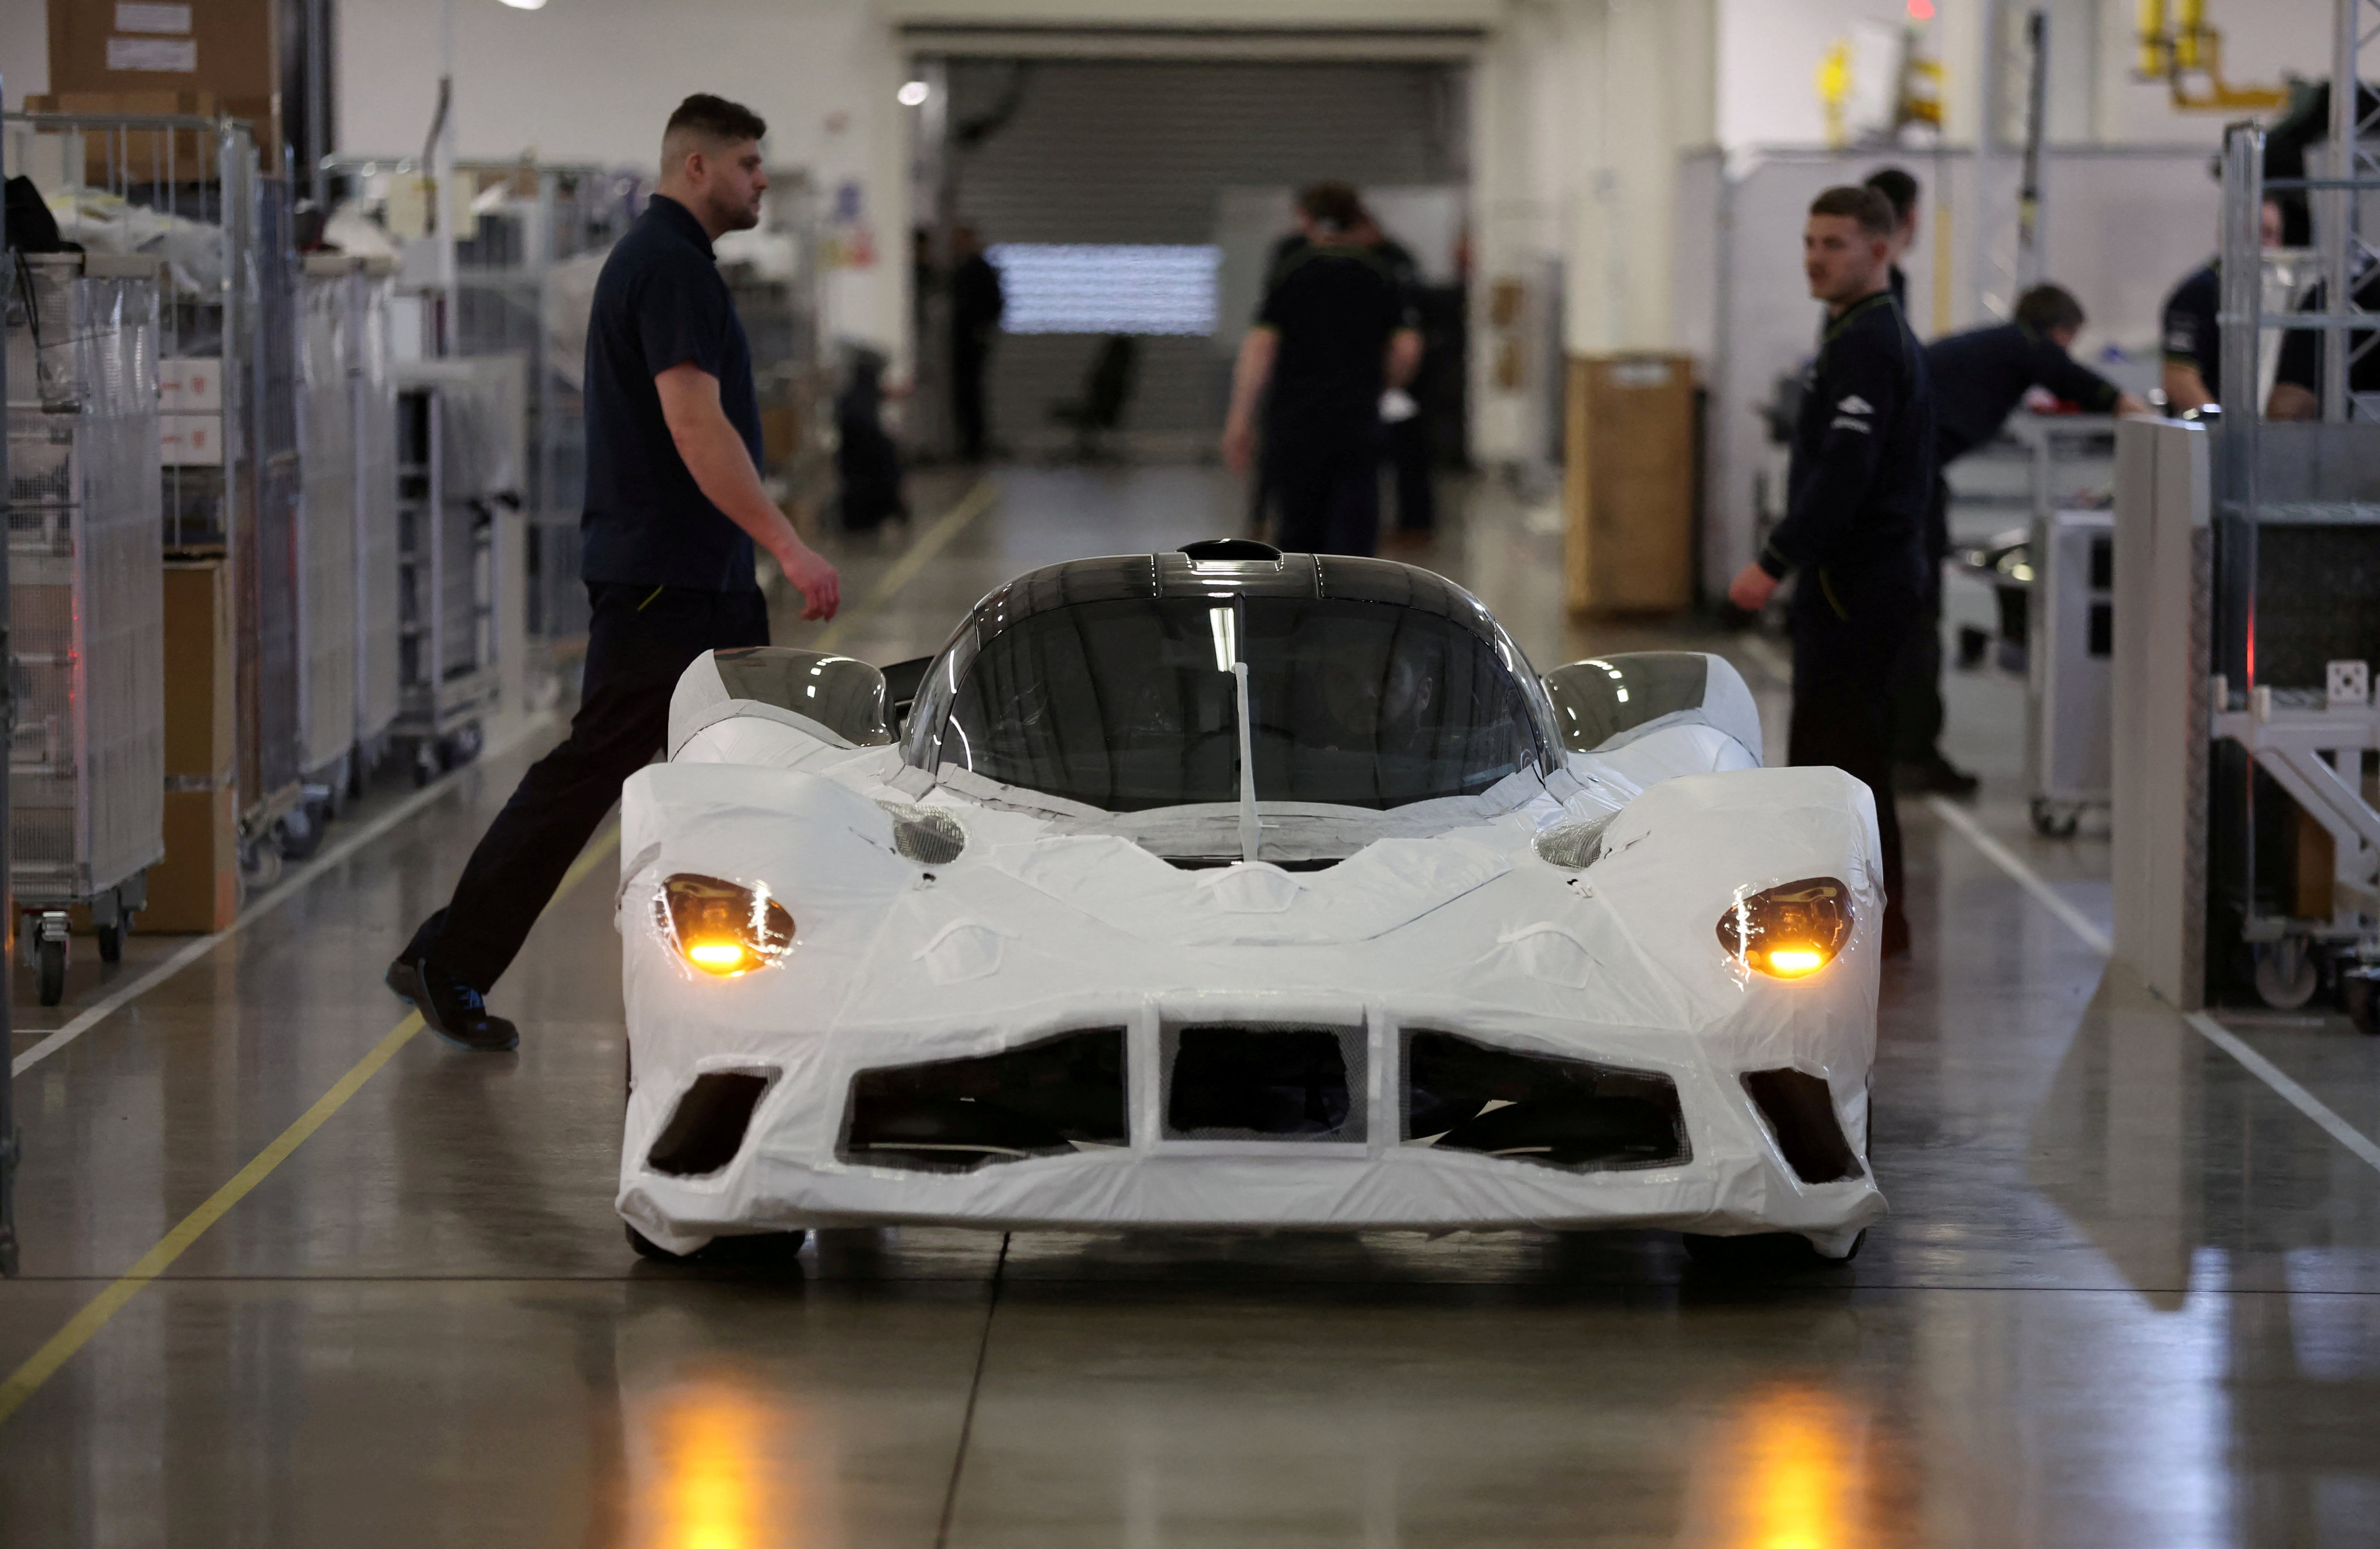 An Aston Martin Valkyrie car is driven off the production line at the company’s factory in Gaydon, Britain, on March 16, 2022. Photo: Reuters